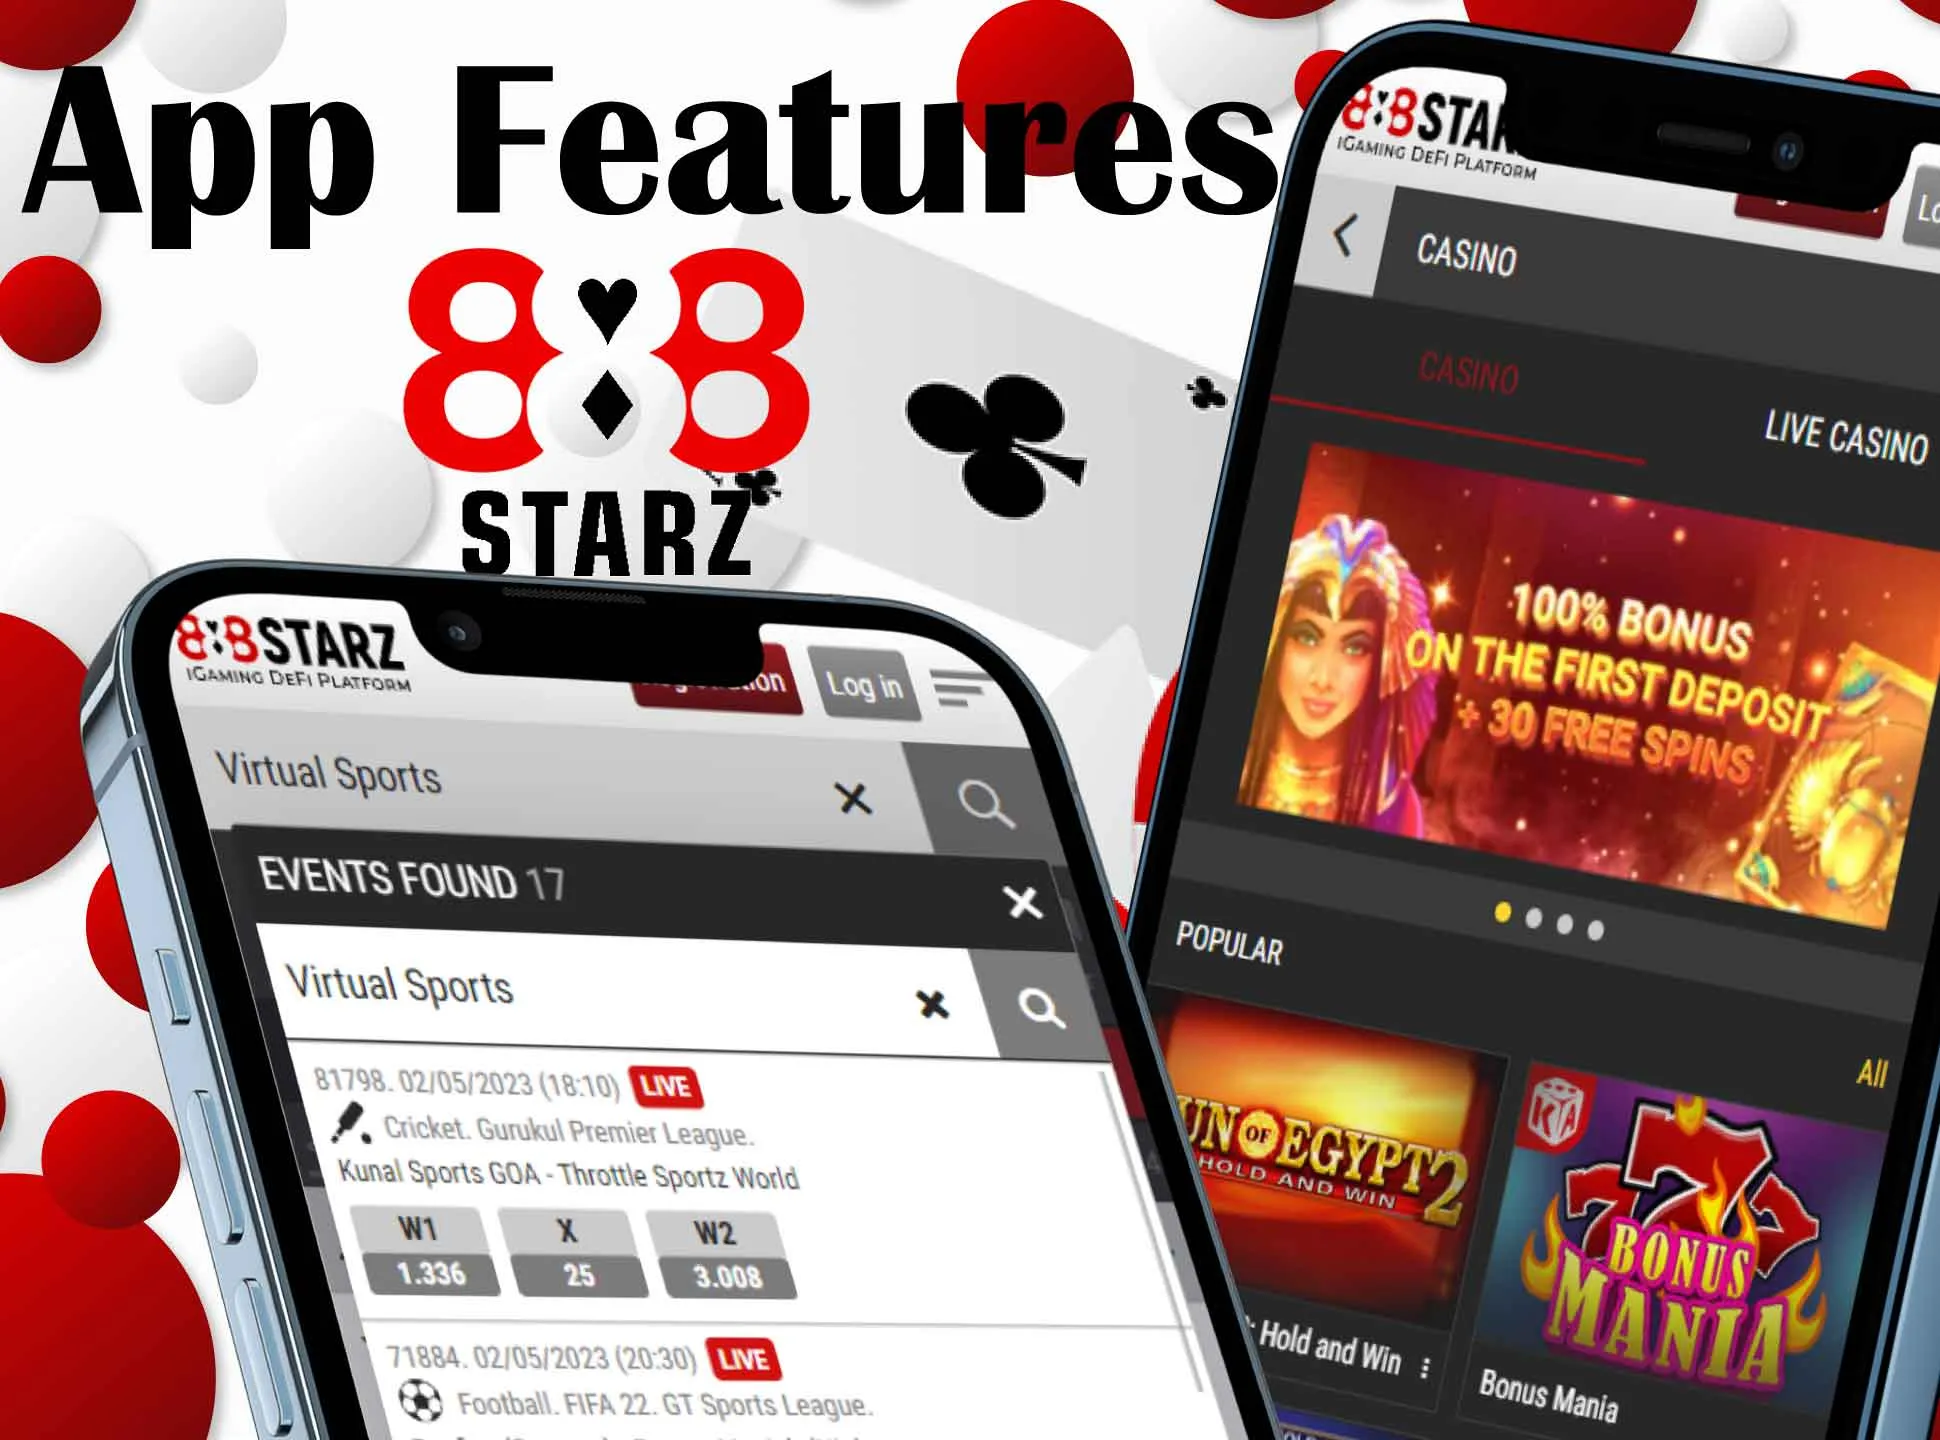 888starz app has all the features for convenient betting.